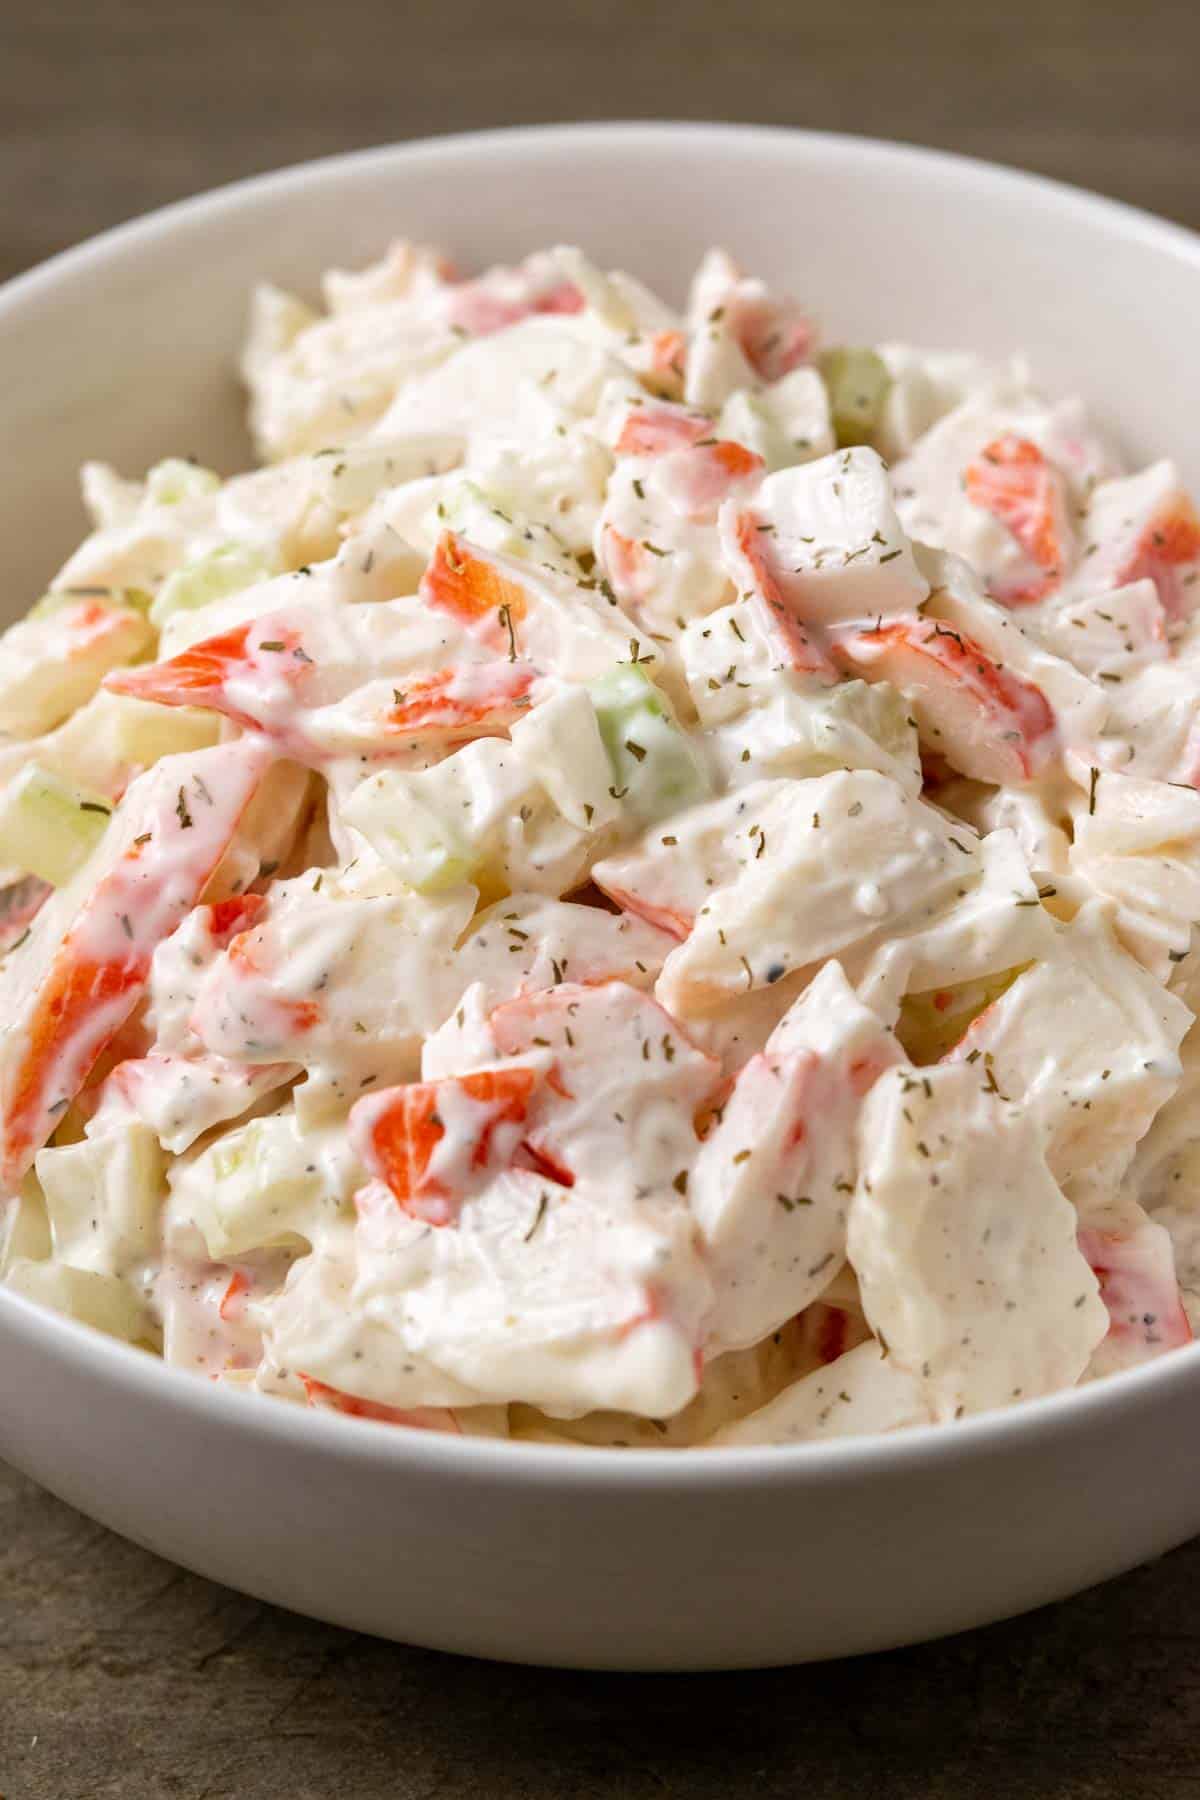 https://zonacooks.com/wp-content/uploads/2021/06/Cold-Seafood-Salad-Recipe-for-Two-5.jpg